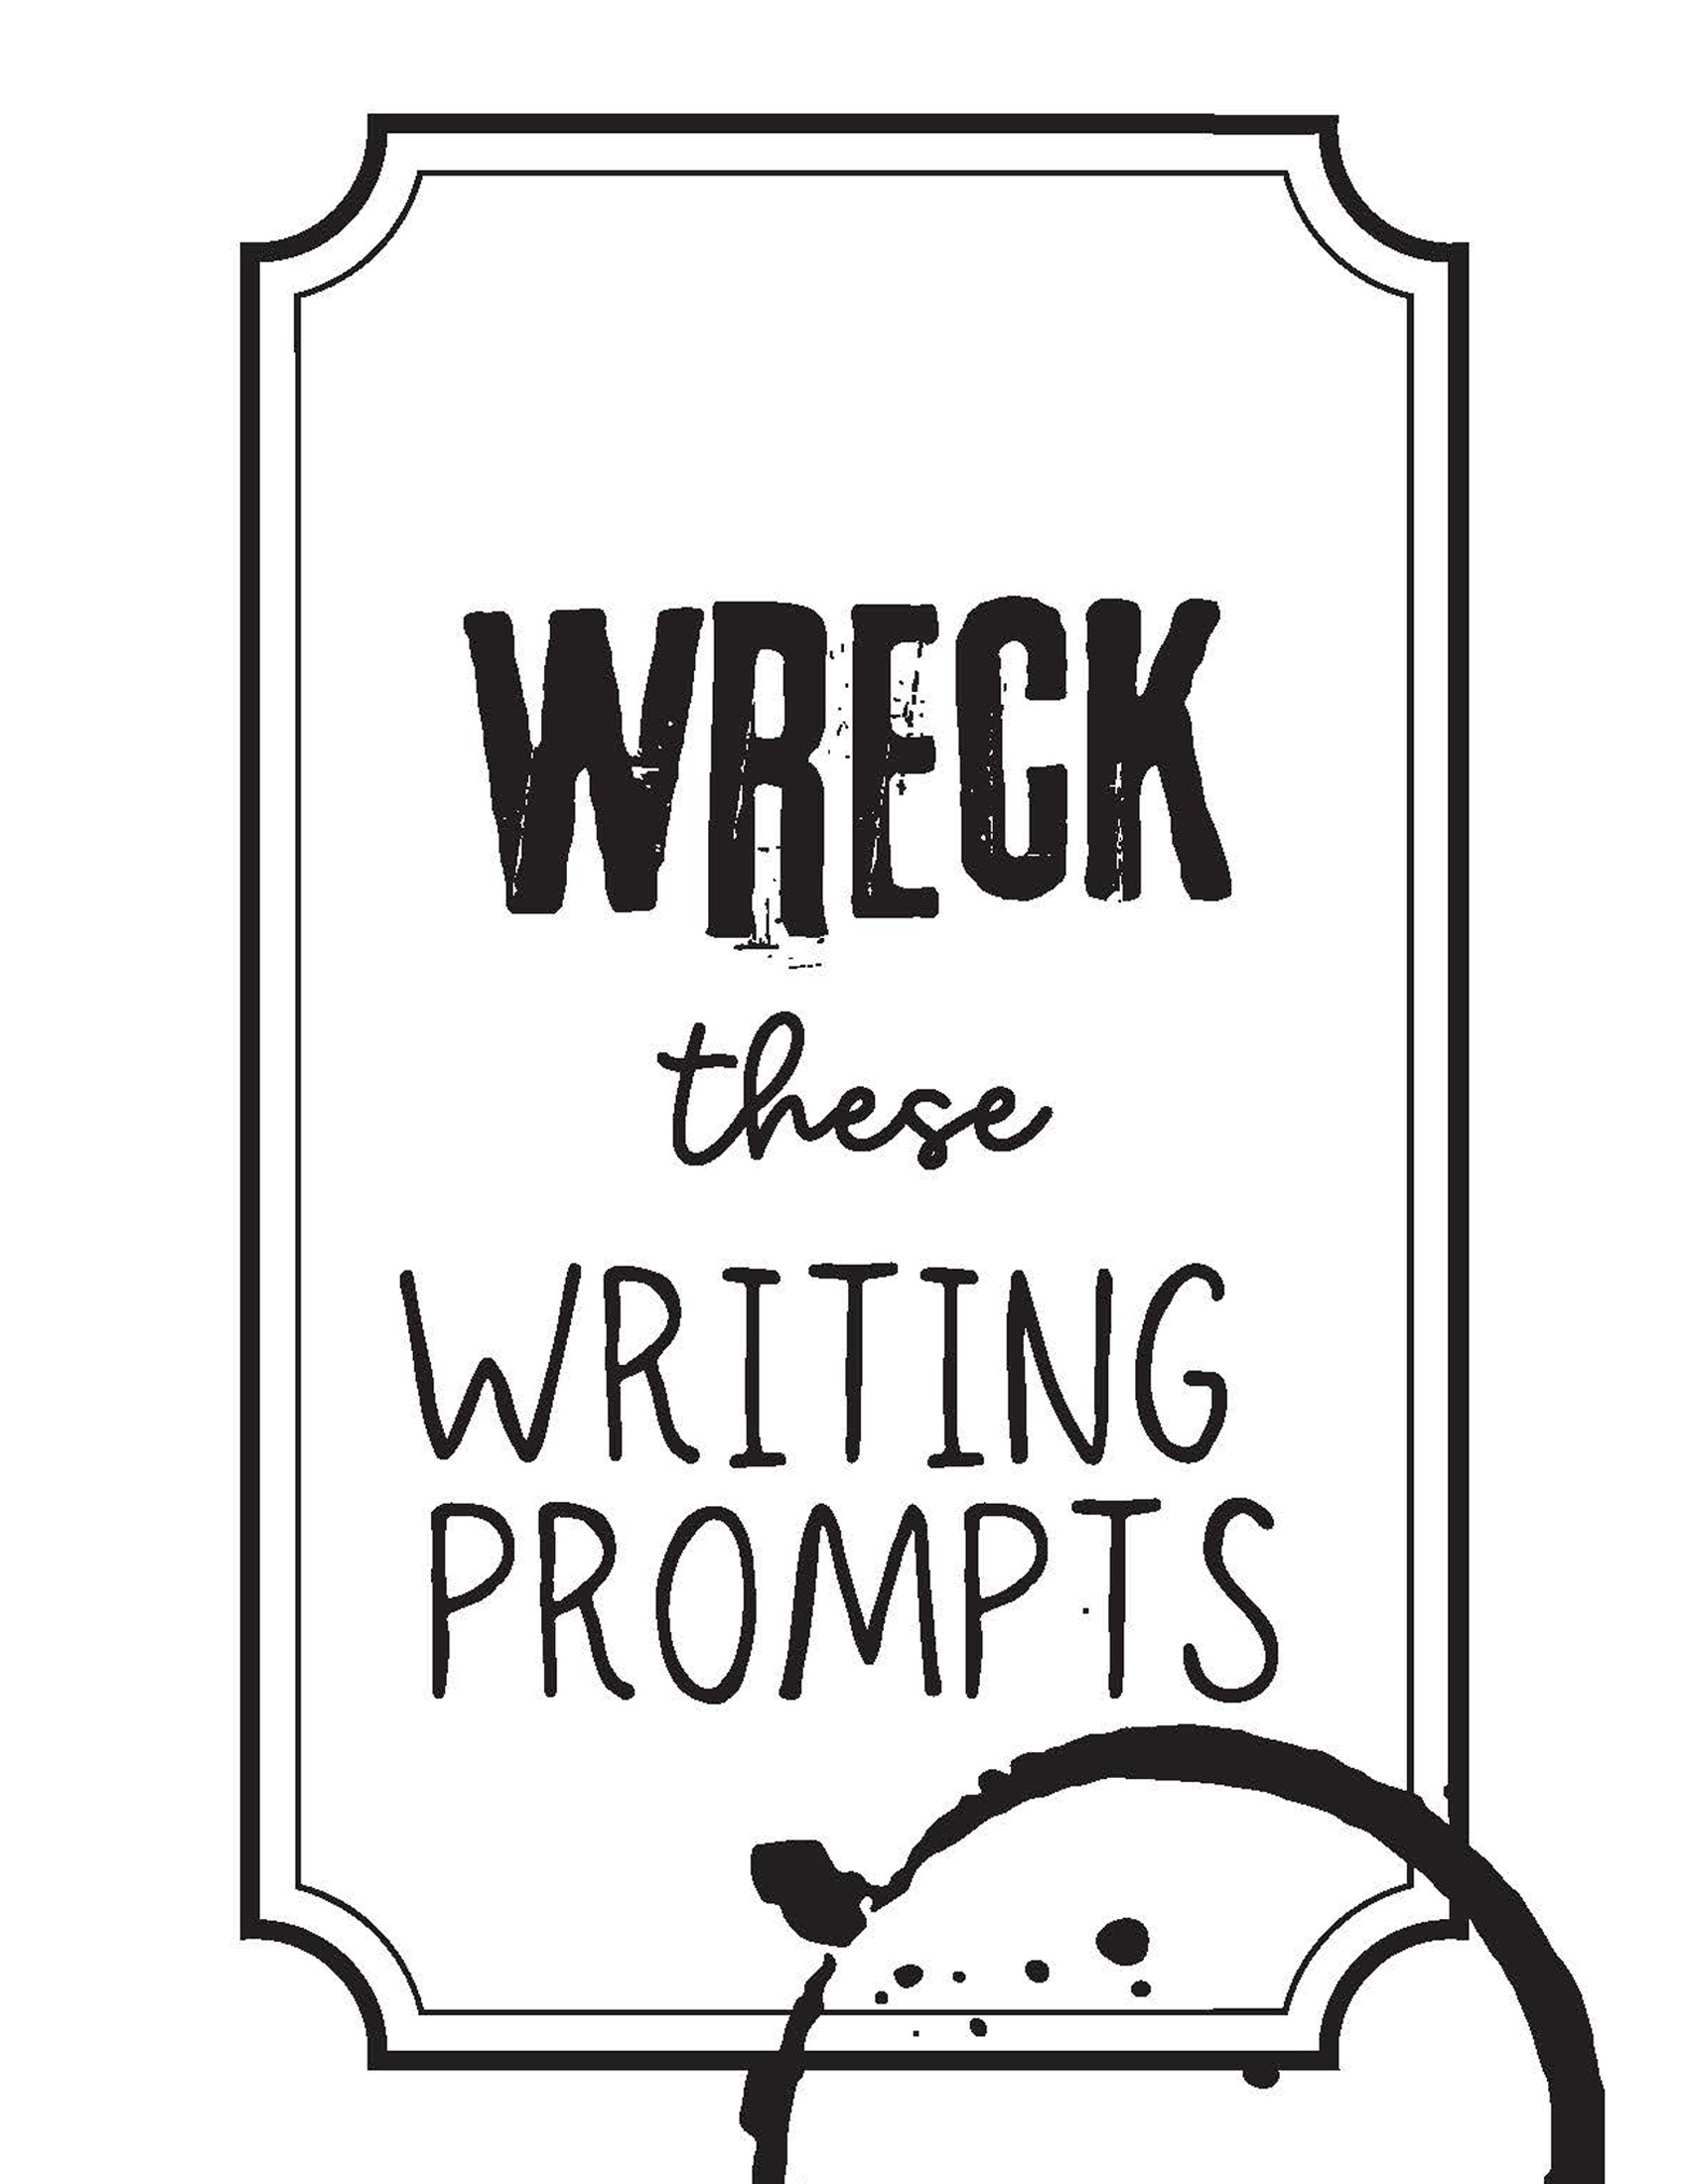 Graphic of the first page of the Wreck These Writing Prompts Journal - available as a free download from the library